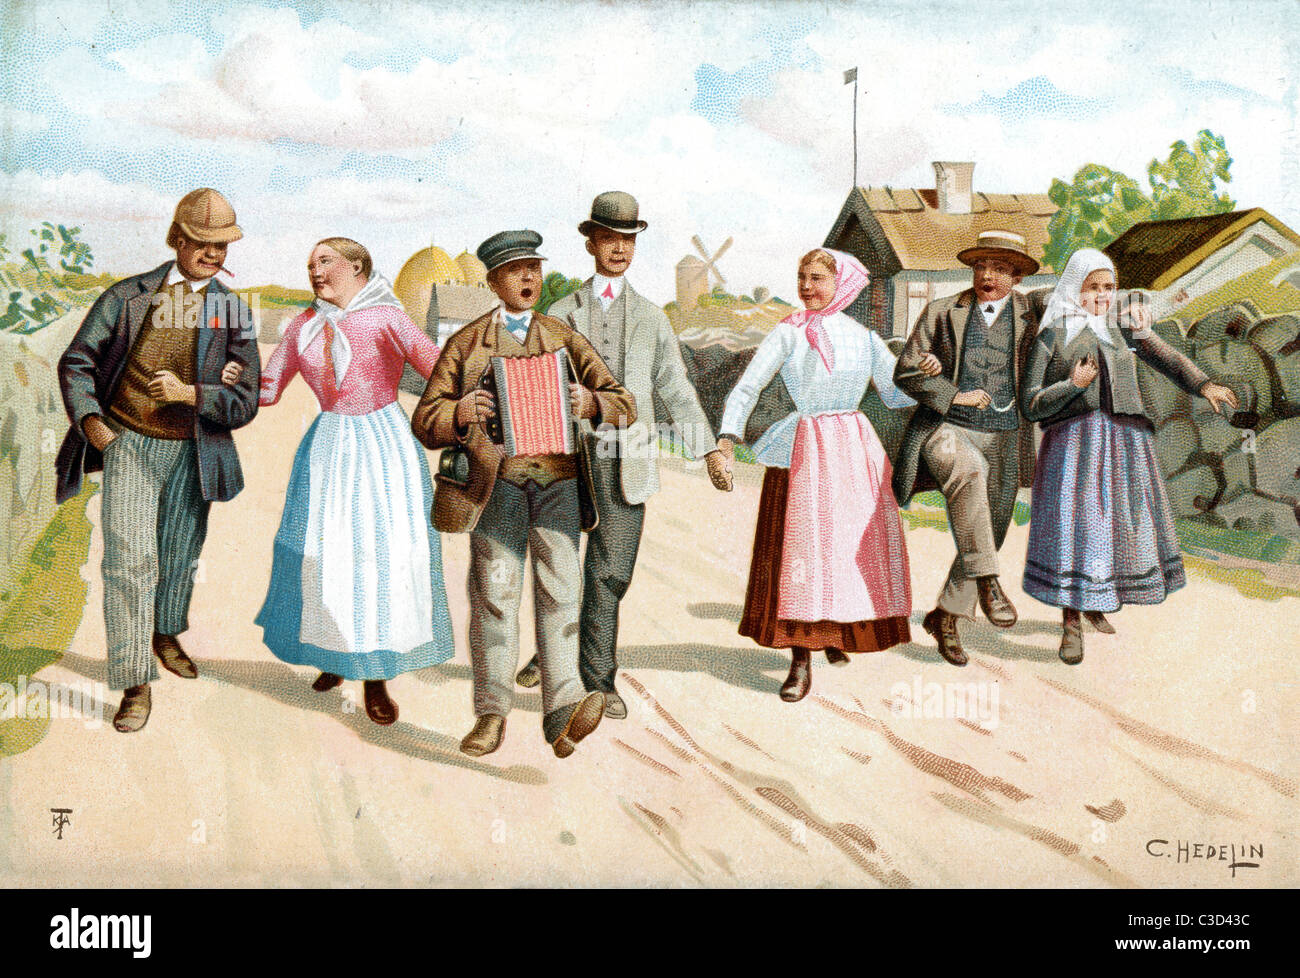 A group of 19th century Swedish people walking down a county lane Stock Photo